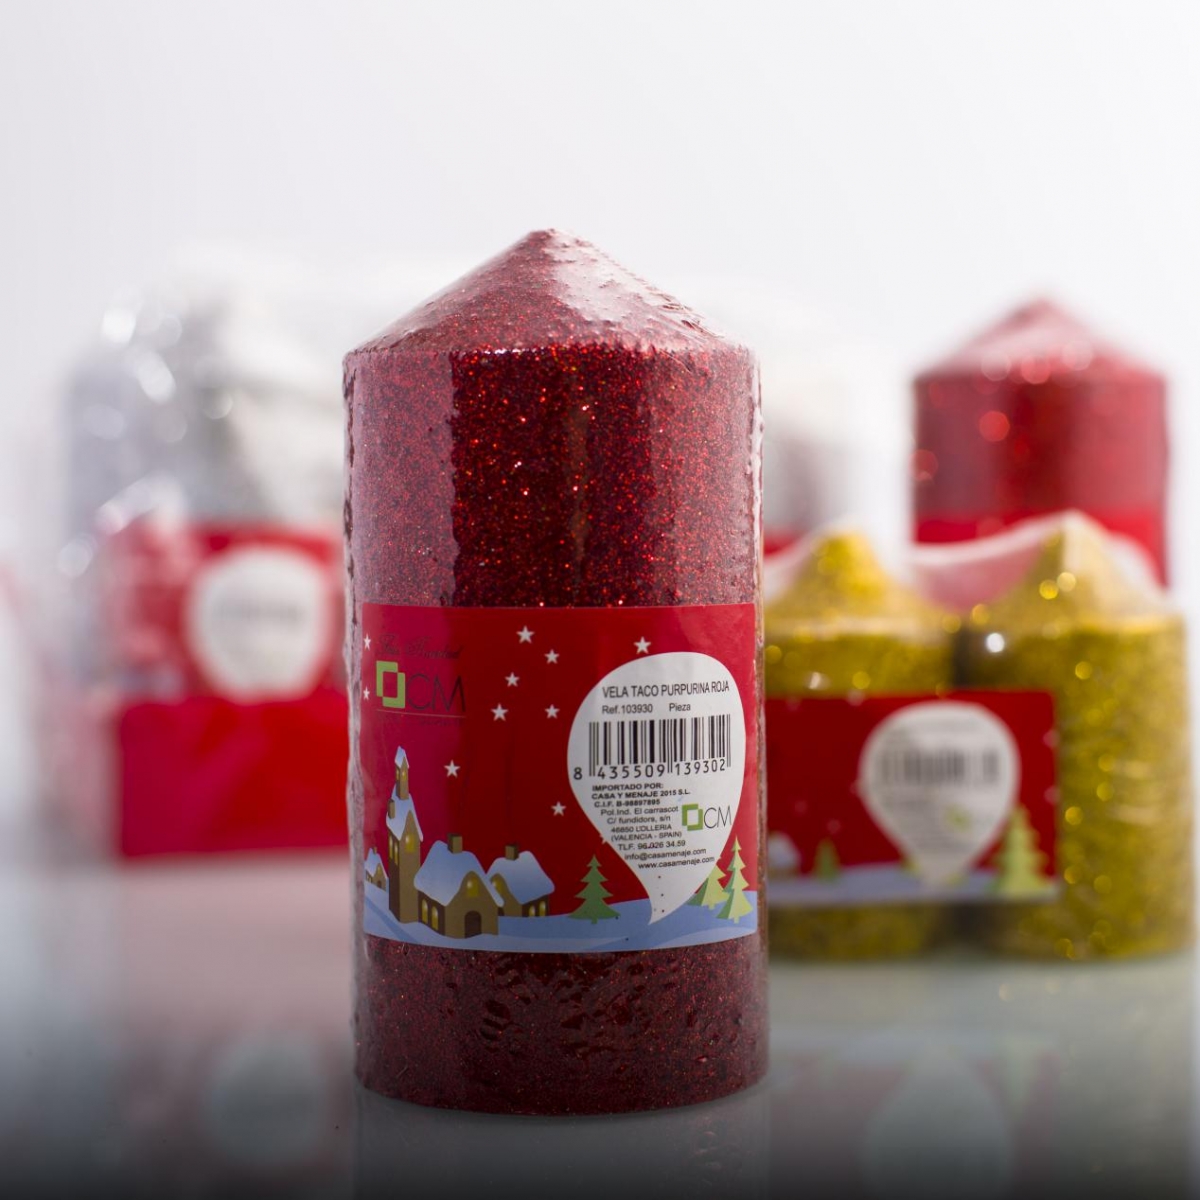 Pillar Candles：Red Gold Dust , Set 6, Shrink Wrap, Christmas Home Decoration ,China Factory ,Cheapest Price-HOWCANDLE-Candles,Scented Candles,Aromatherapy Candles,Soy Candles,Vegan Candles,Jar Candles,Pillar Candles,Candle Gift Sets,Essential Oils,Reed Diffuser,Candle Holder,